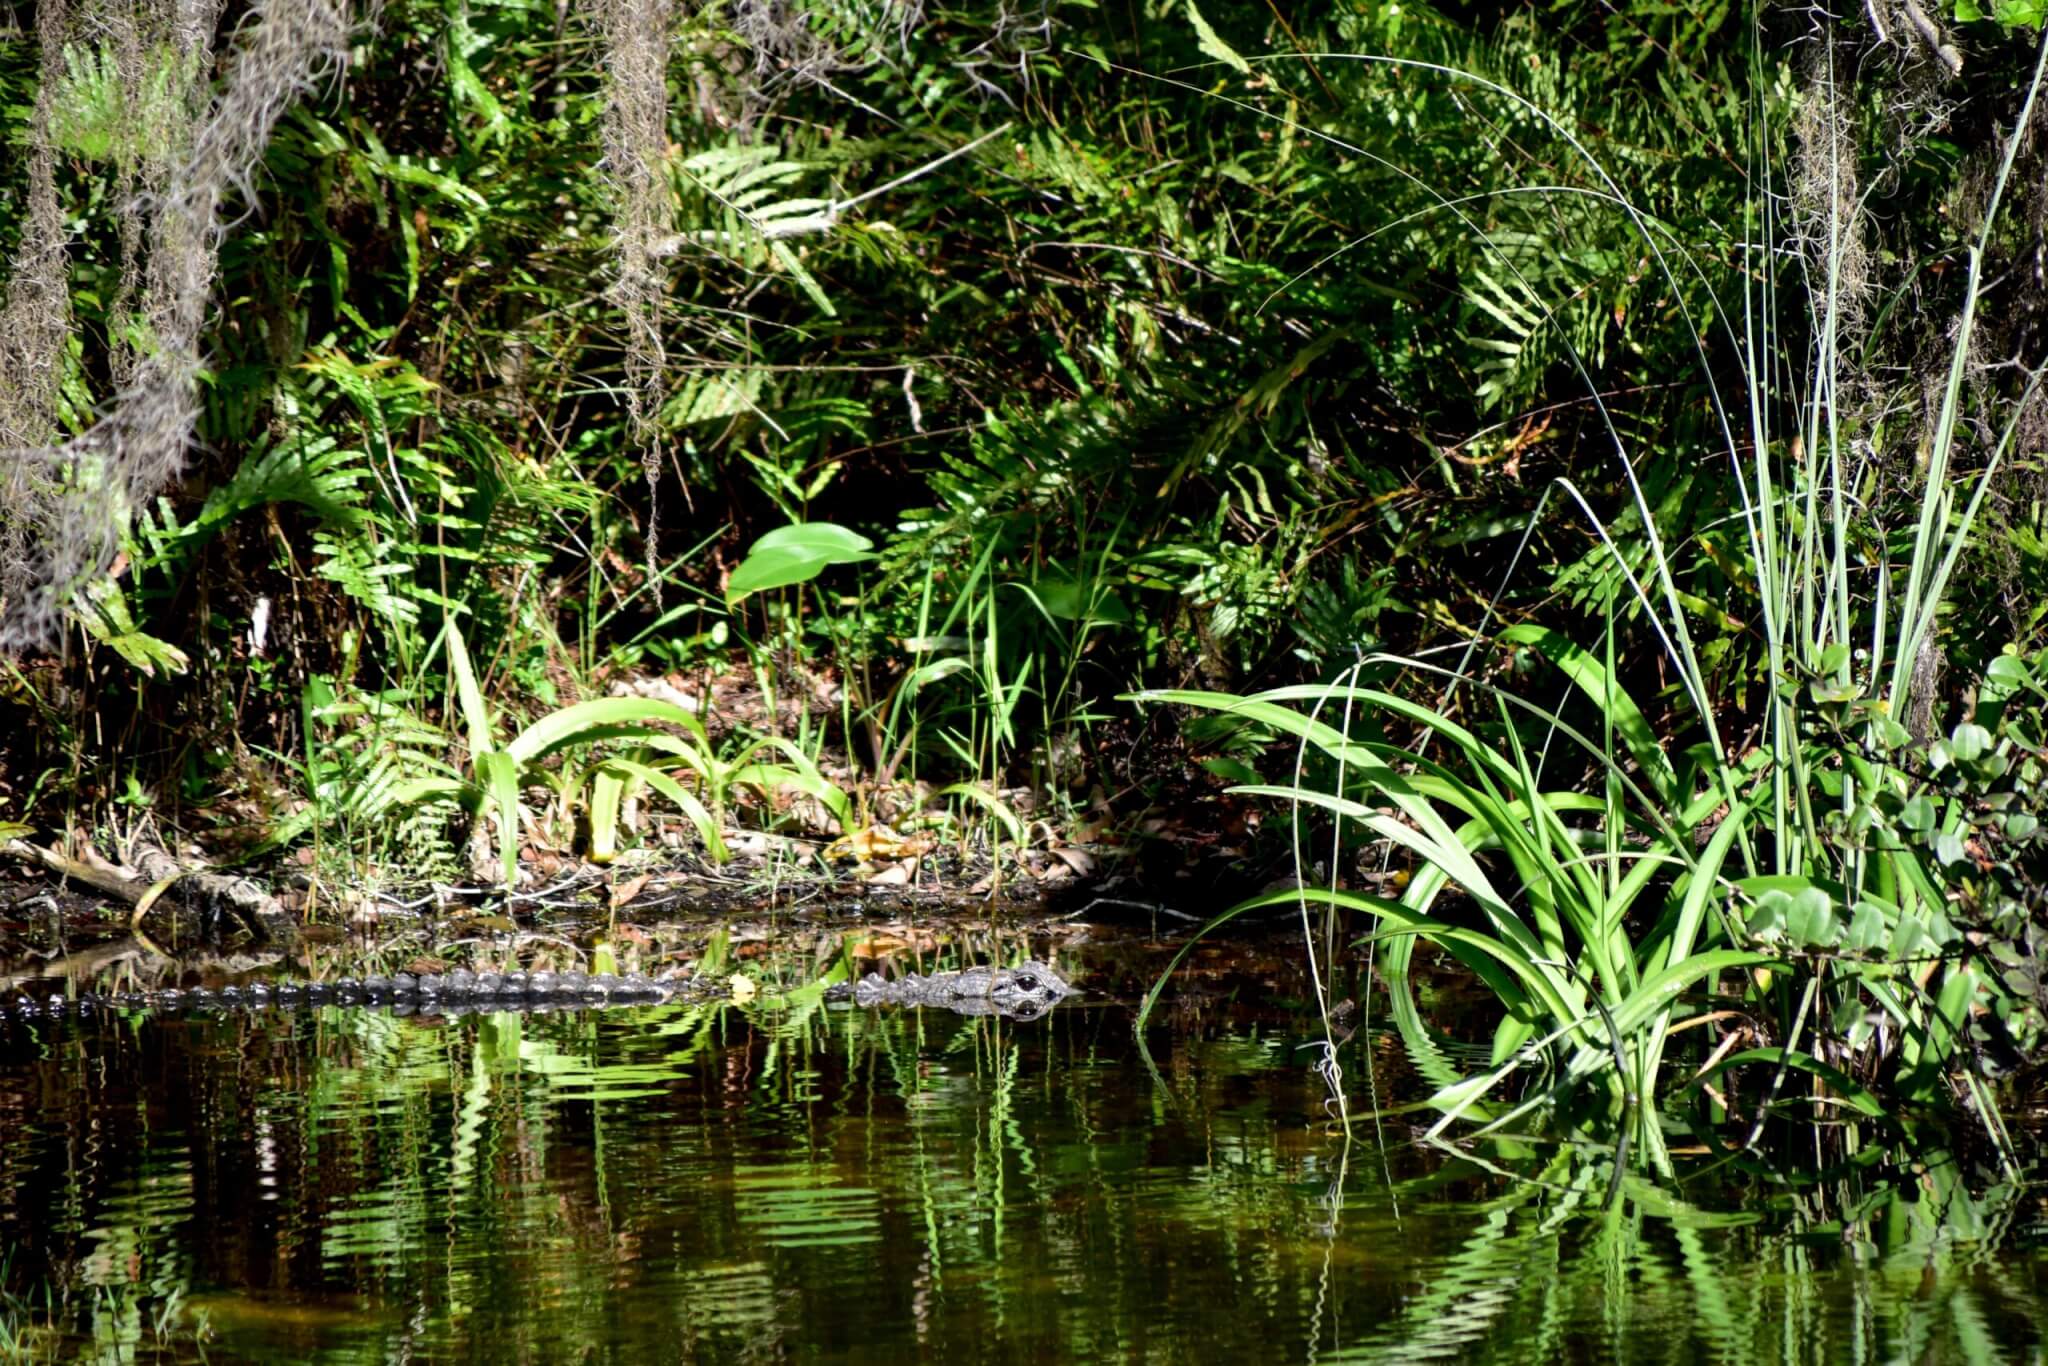 A pond in the Everglades